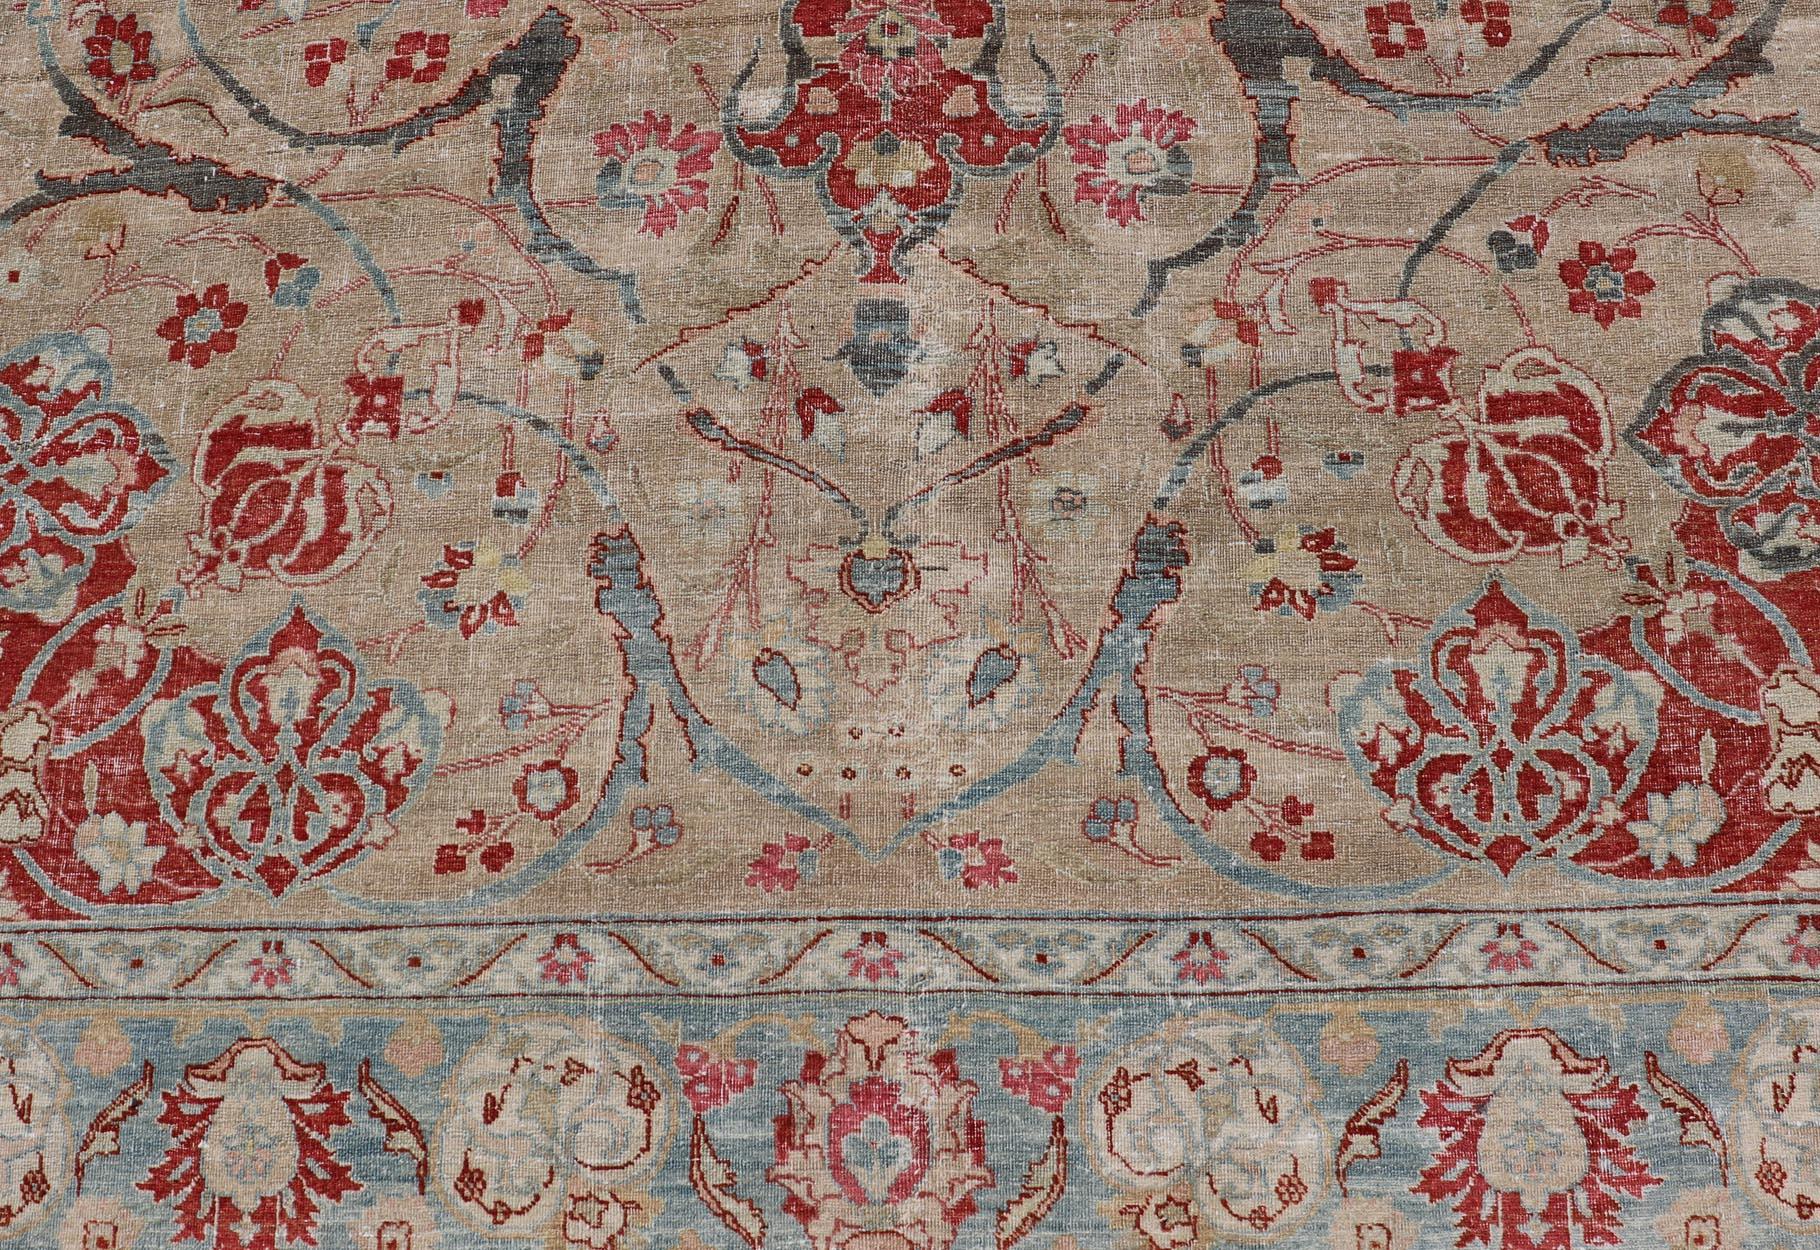 20th Century Antique Persian Tabriz Rug with Floral Medallion Design in Tan, Red, and Blue For Sale